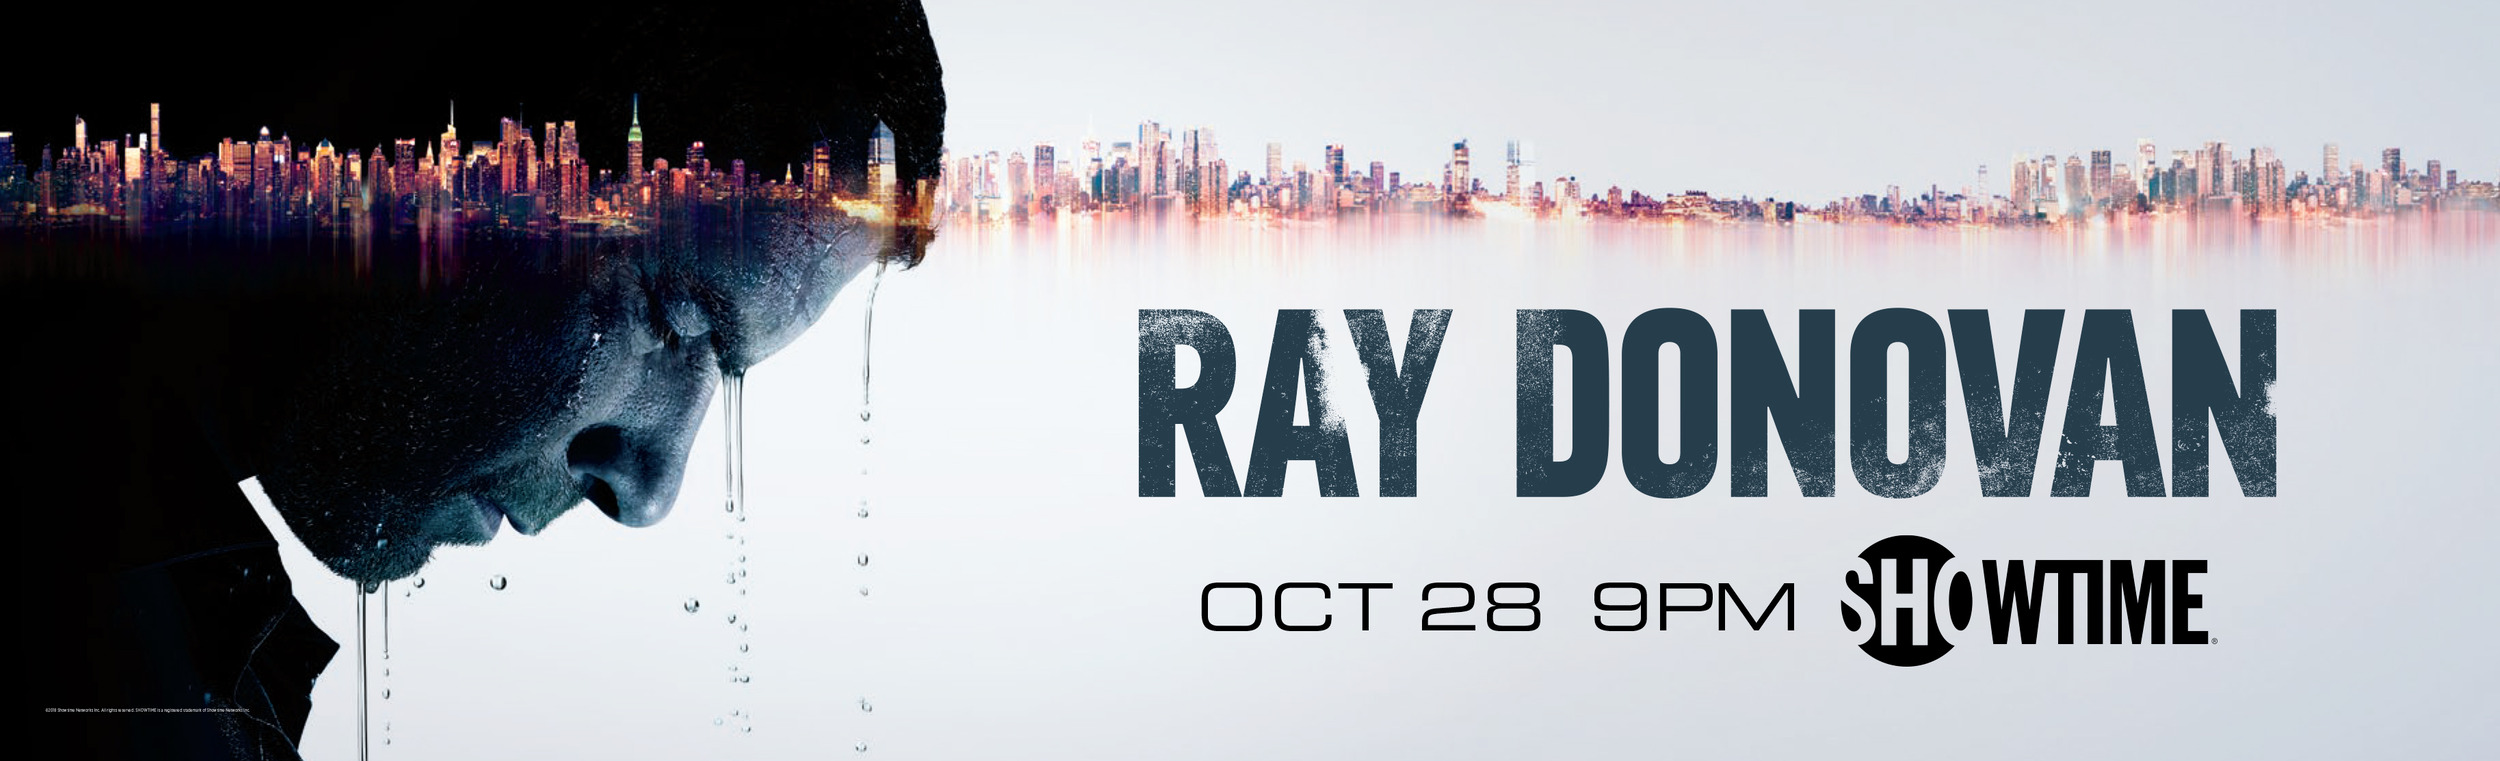 Mega Sized TV Poster Image for Ray Donovan (#11 of 12)